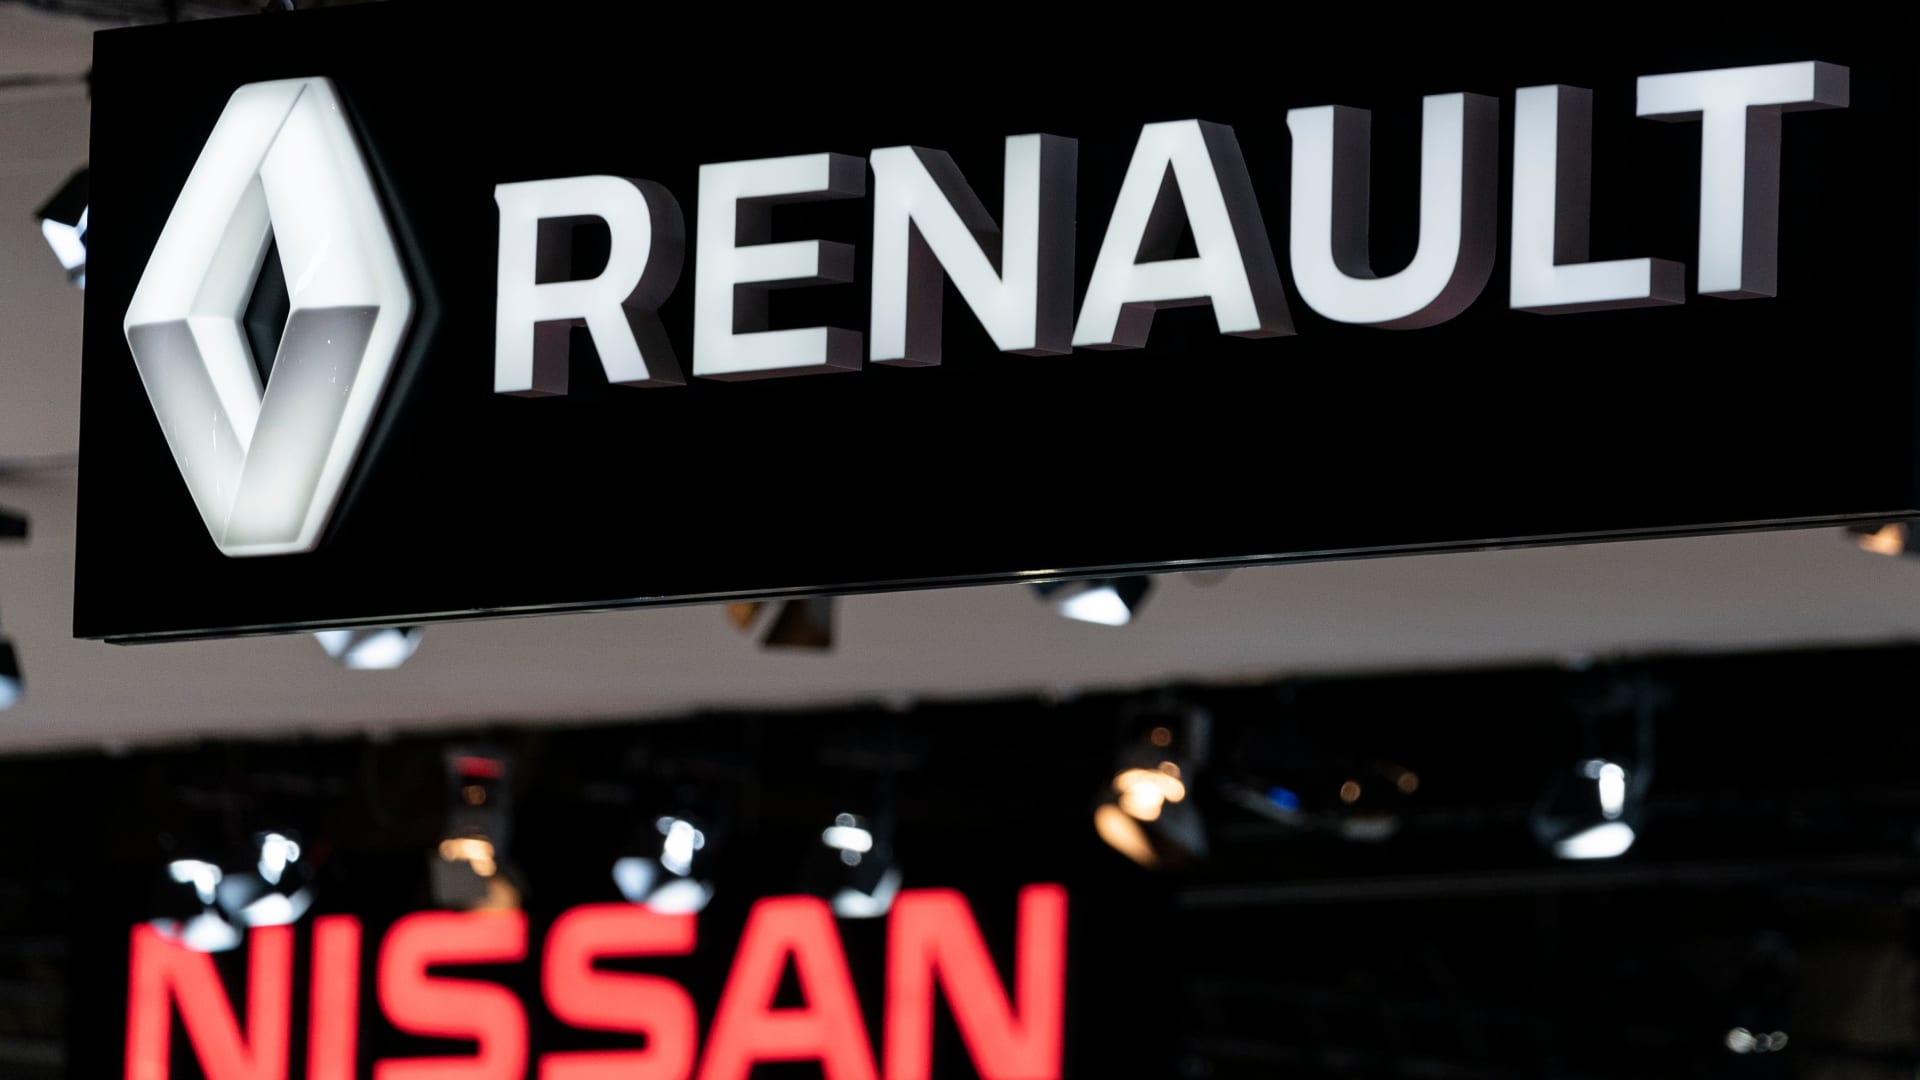 Renault slashes Nissan stake as the automakers overhaul their decades-long alliance